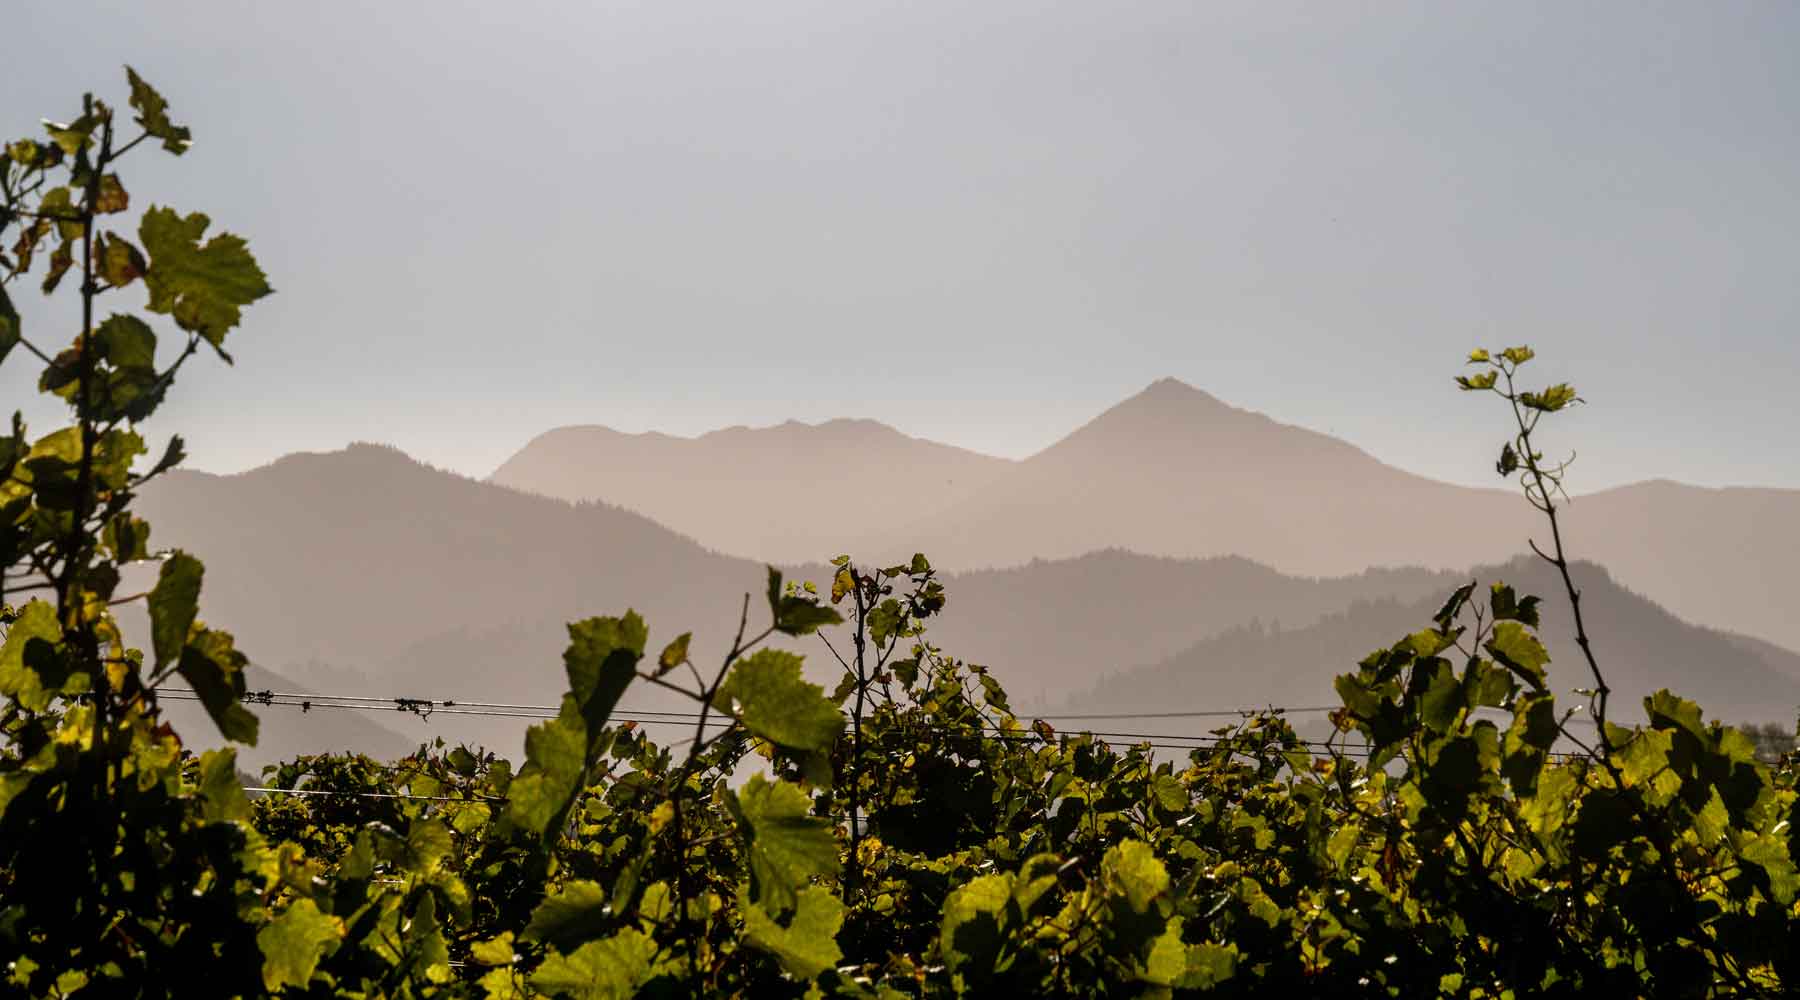 Grape vines of Huia Vineyards in the foreground with the Marlborough hills in the sun in the distance